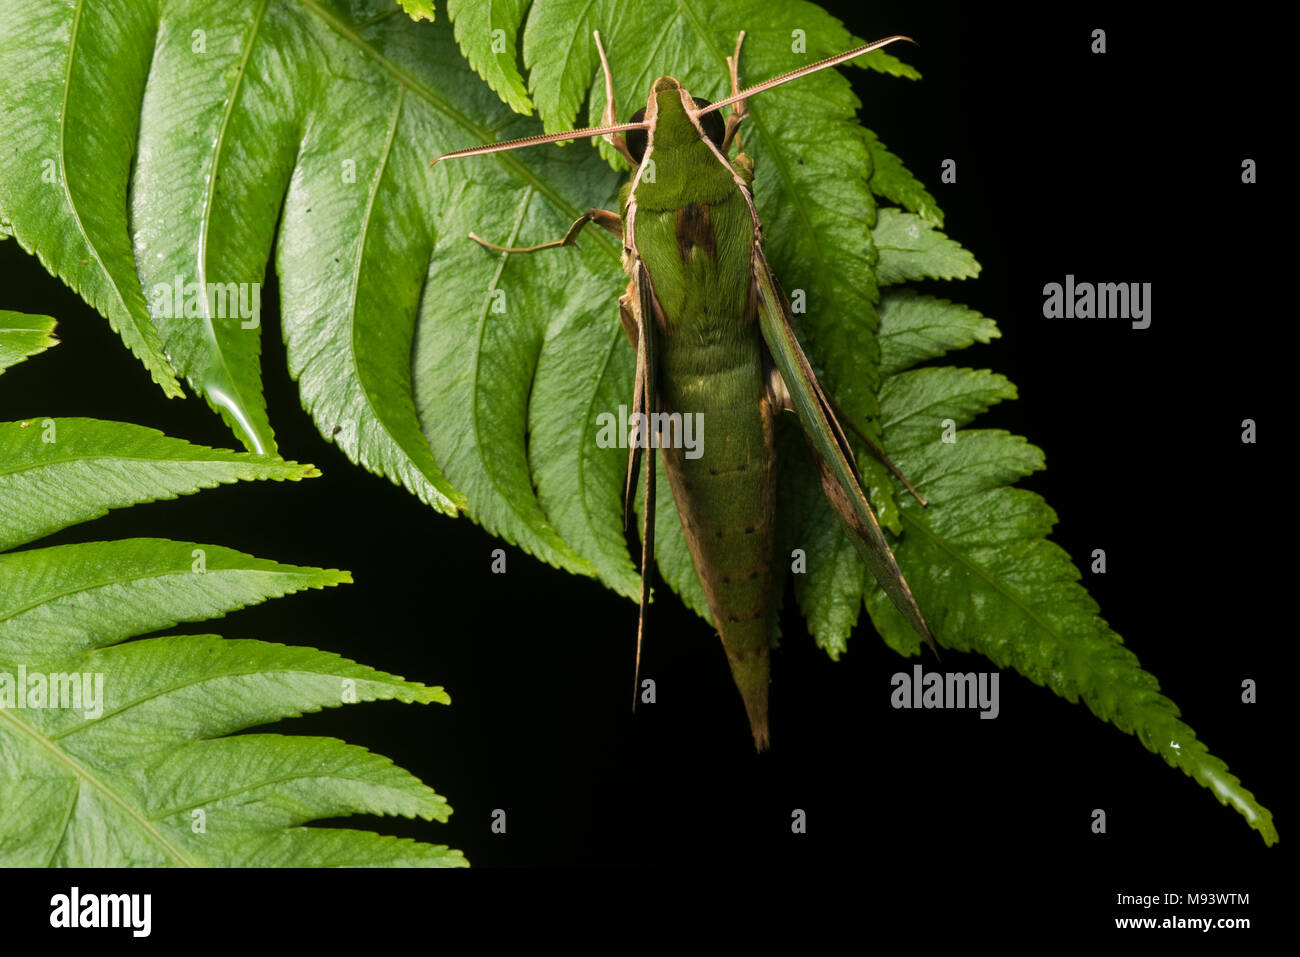 A green sphinx moth from Peru sitting on some ferns. Stock Photo